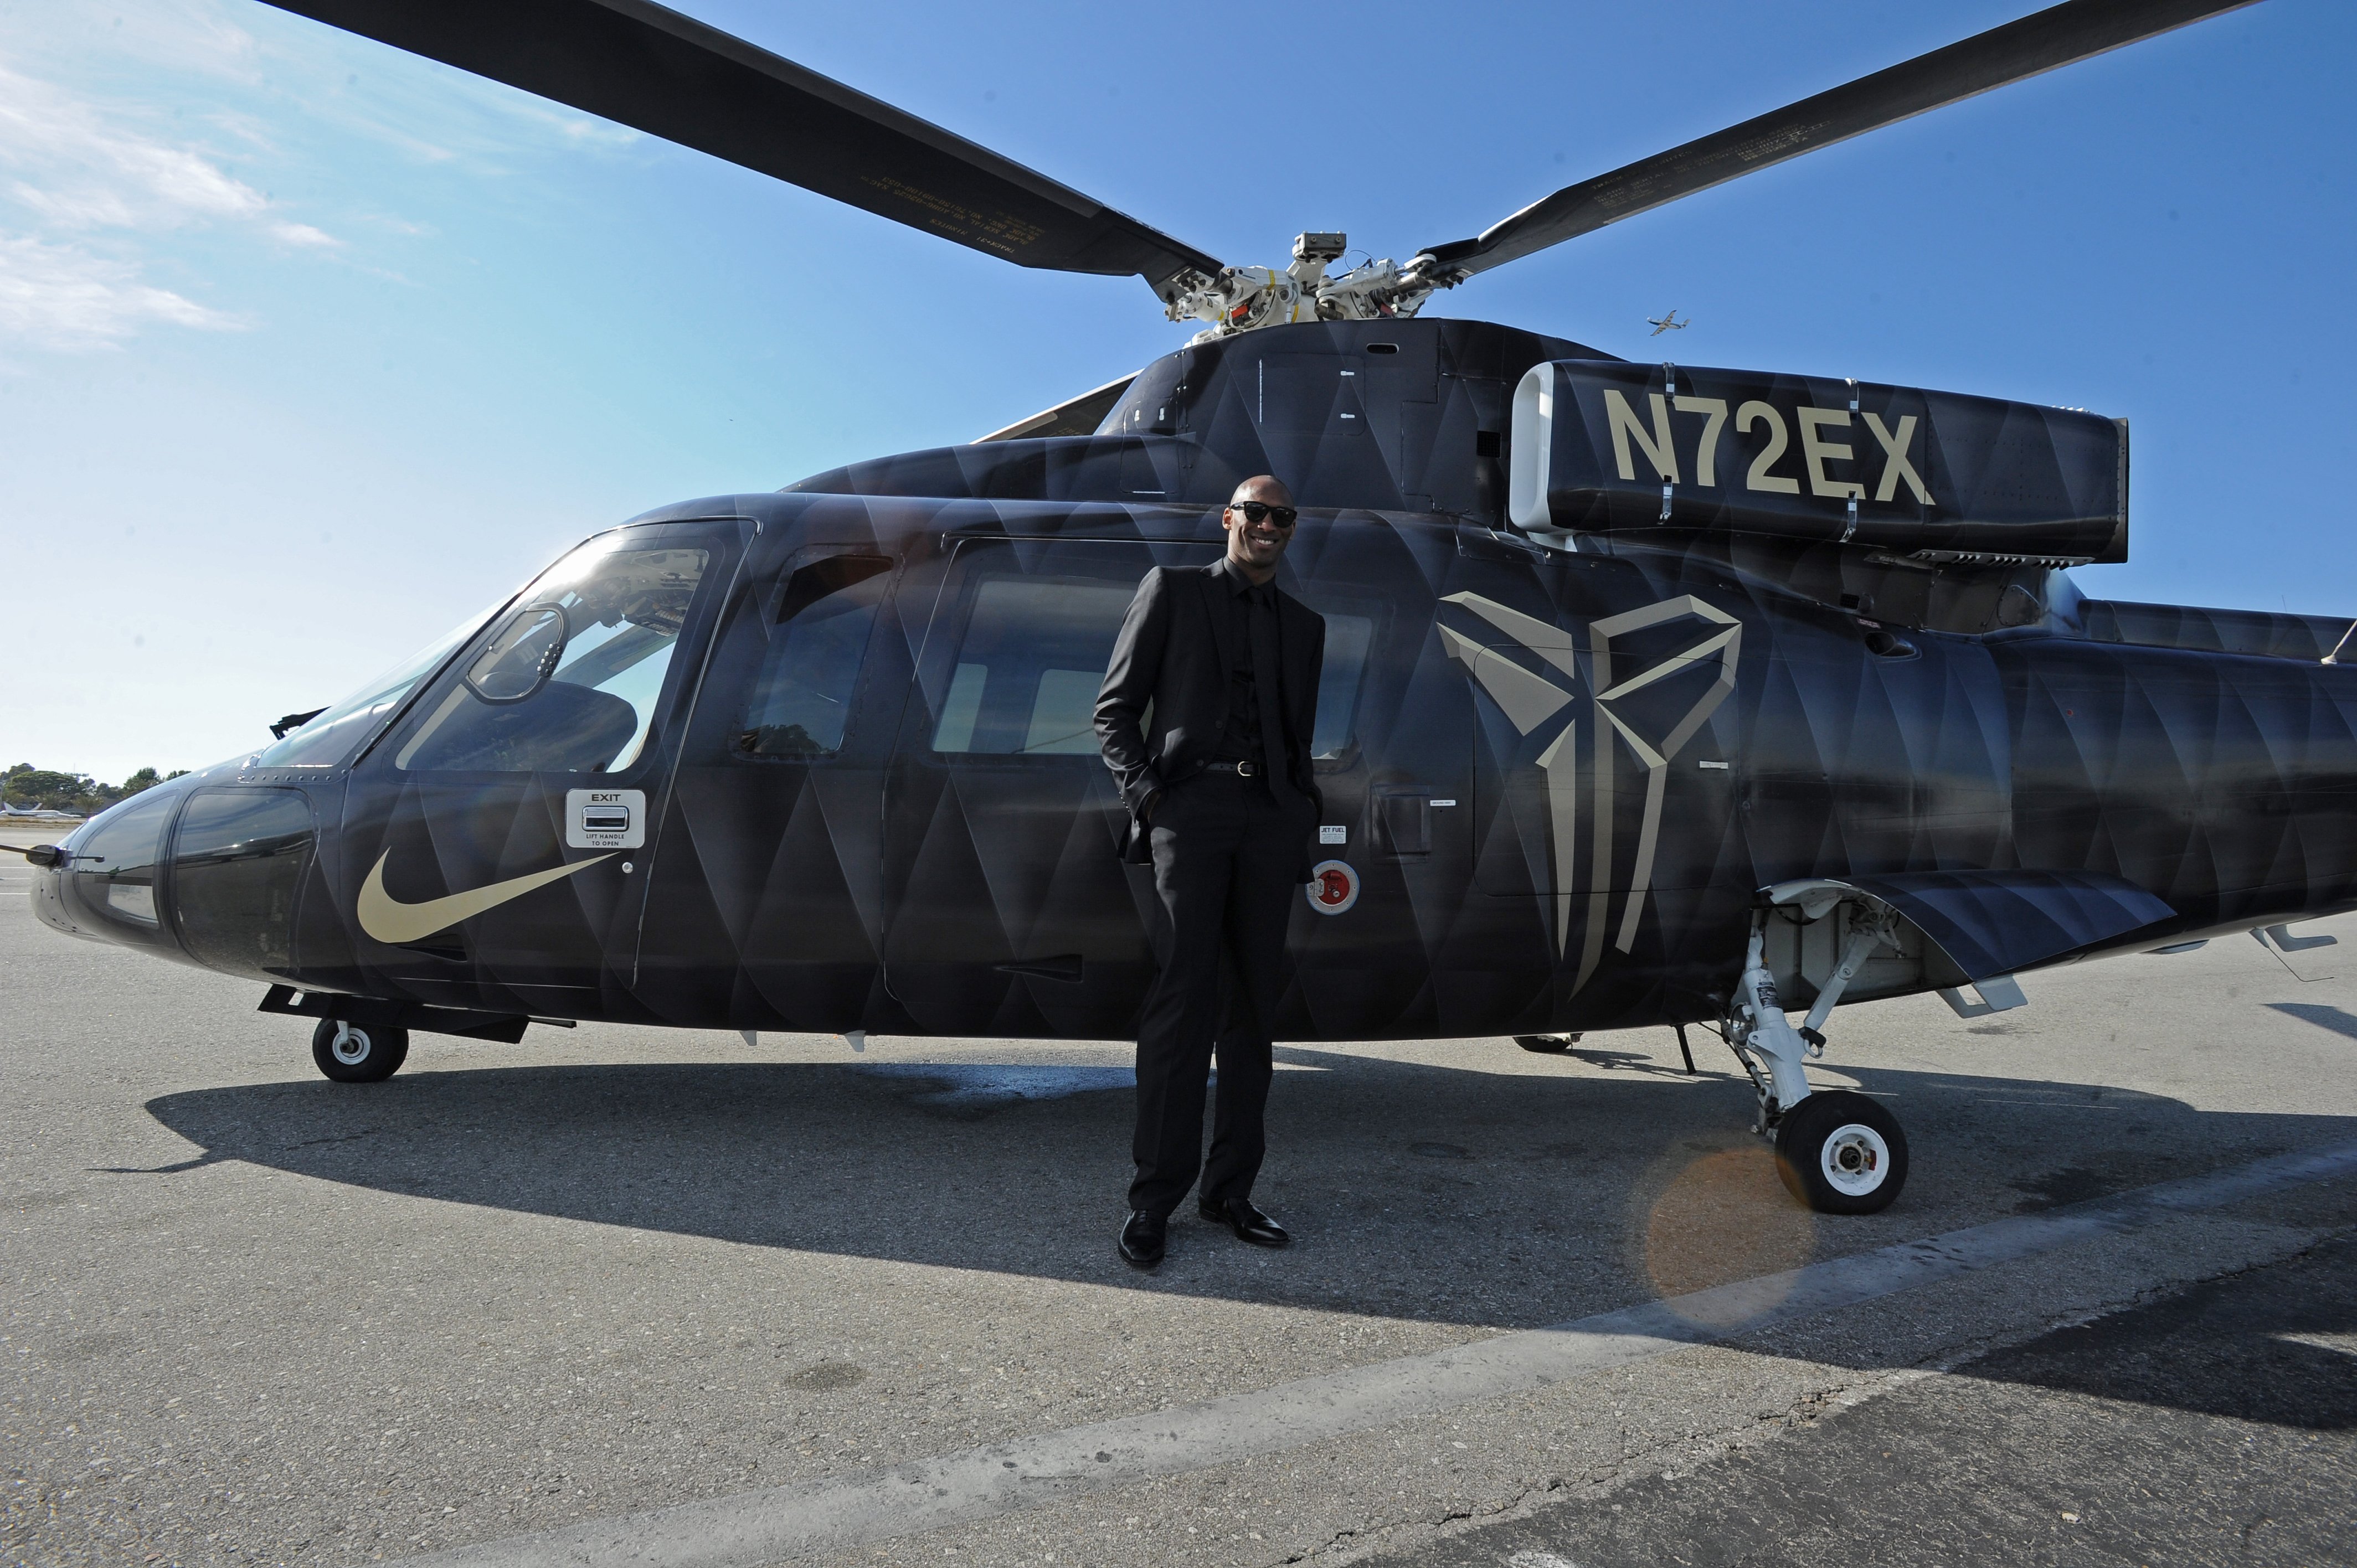 Kobe Bryant poses for a photo in front of the helicopter he took to his last game against the Utah Jazz on April 13, 2016 in California | Photo: Getty Images